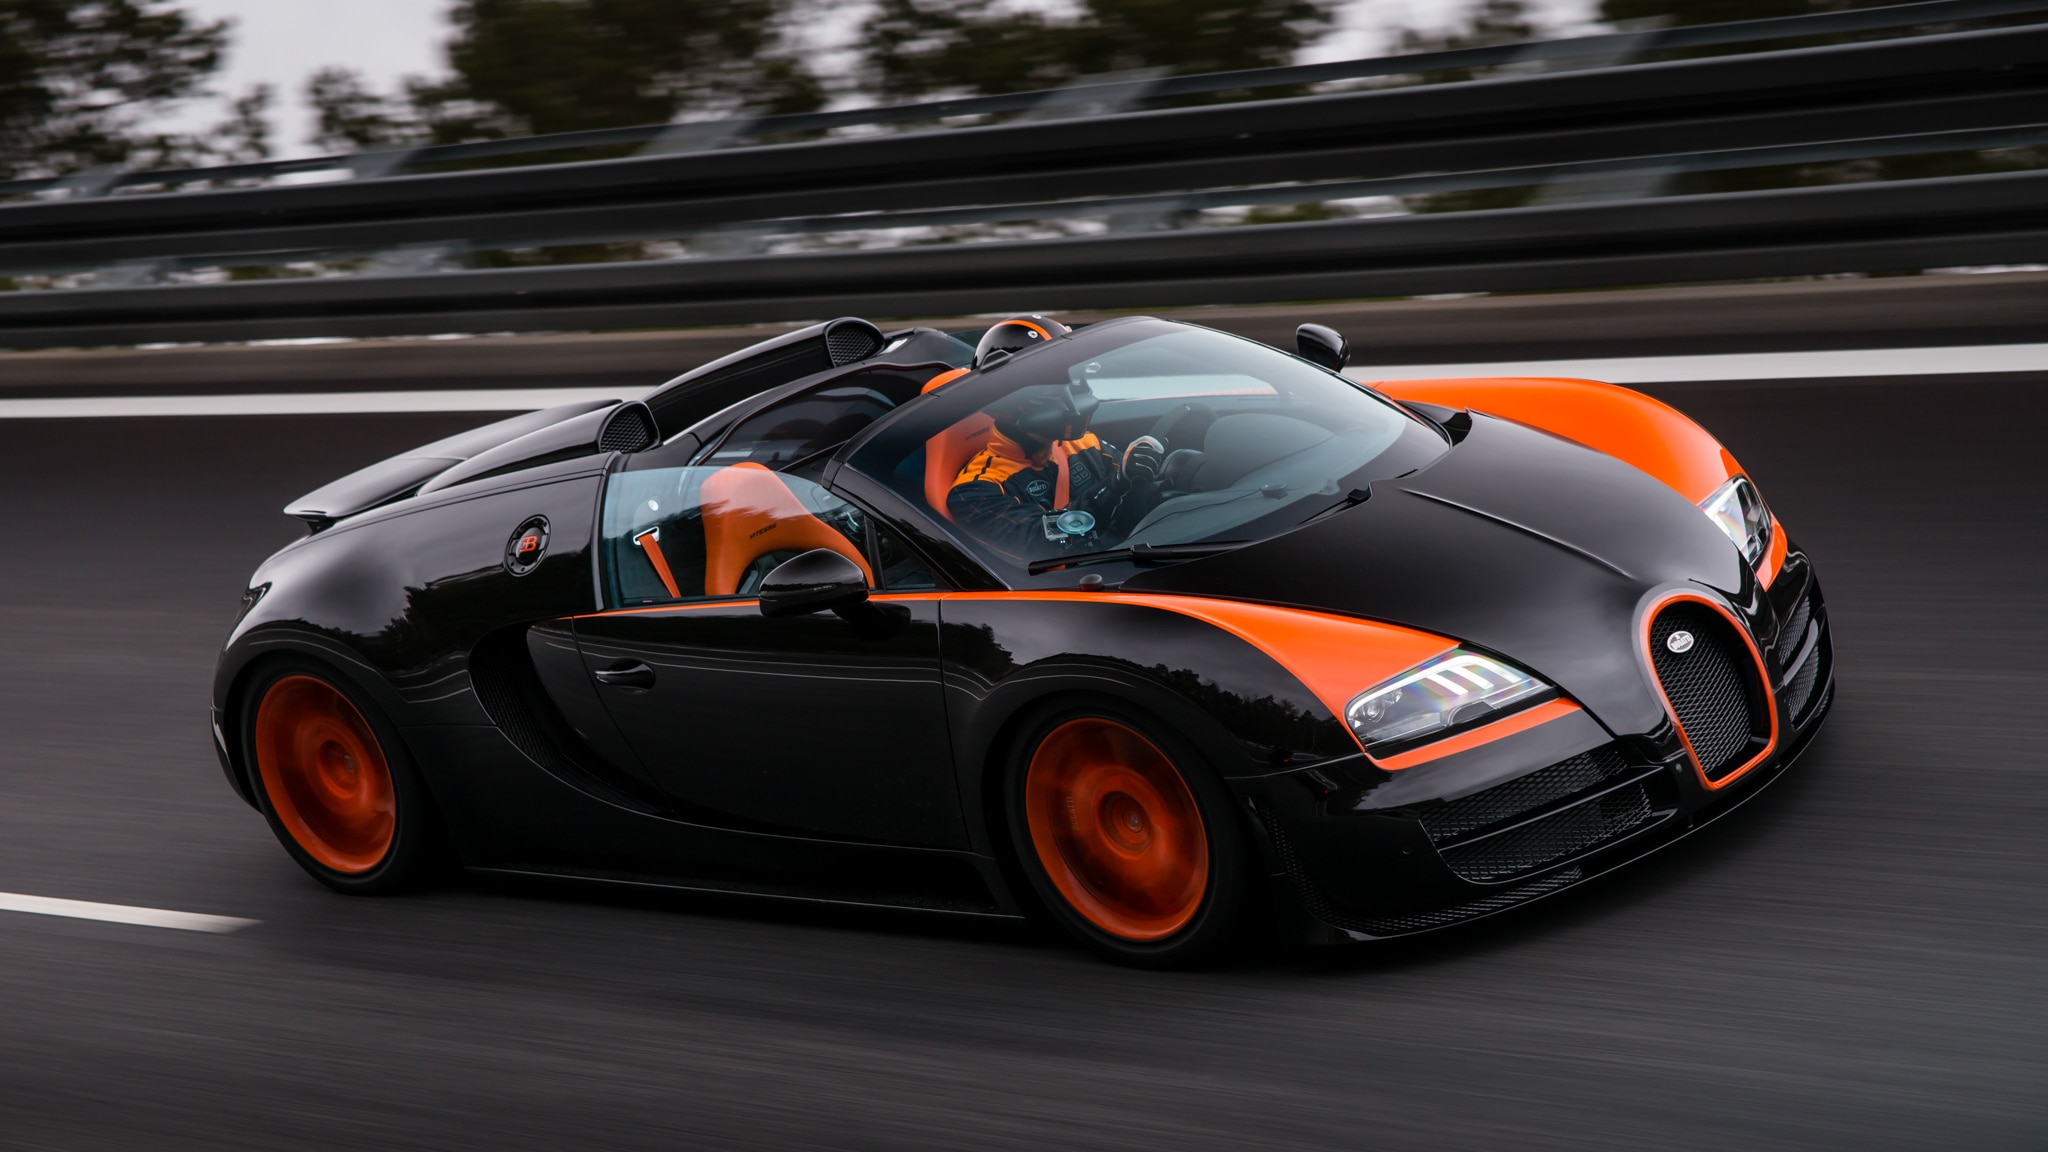 The Bugatti Veyron: History, Buying Tips, Photo, and More